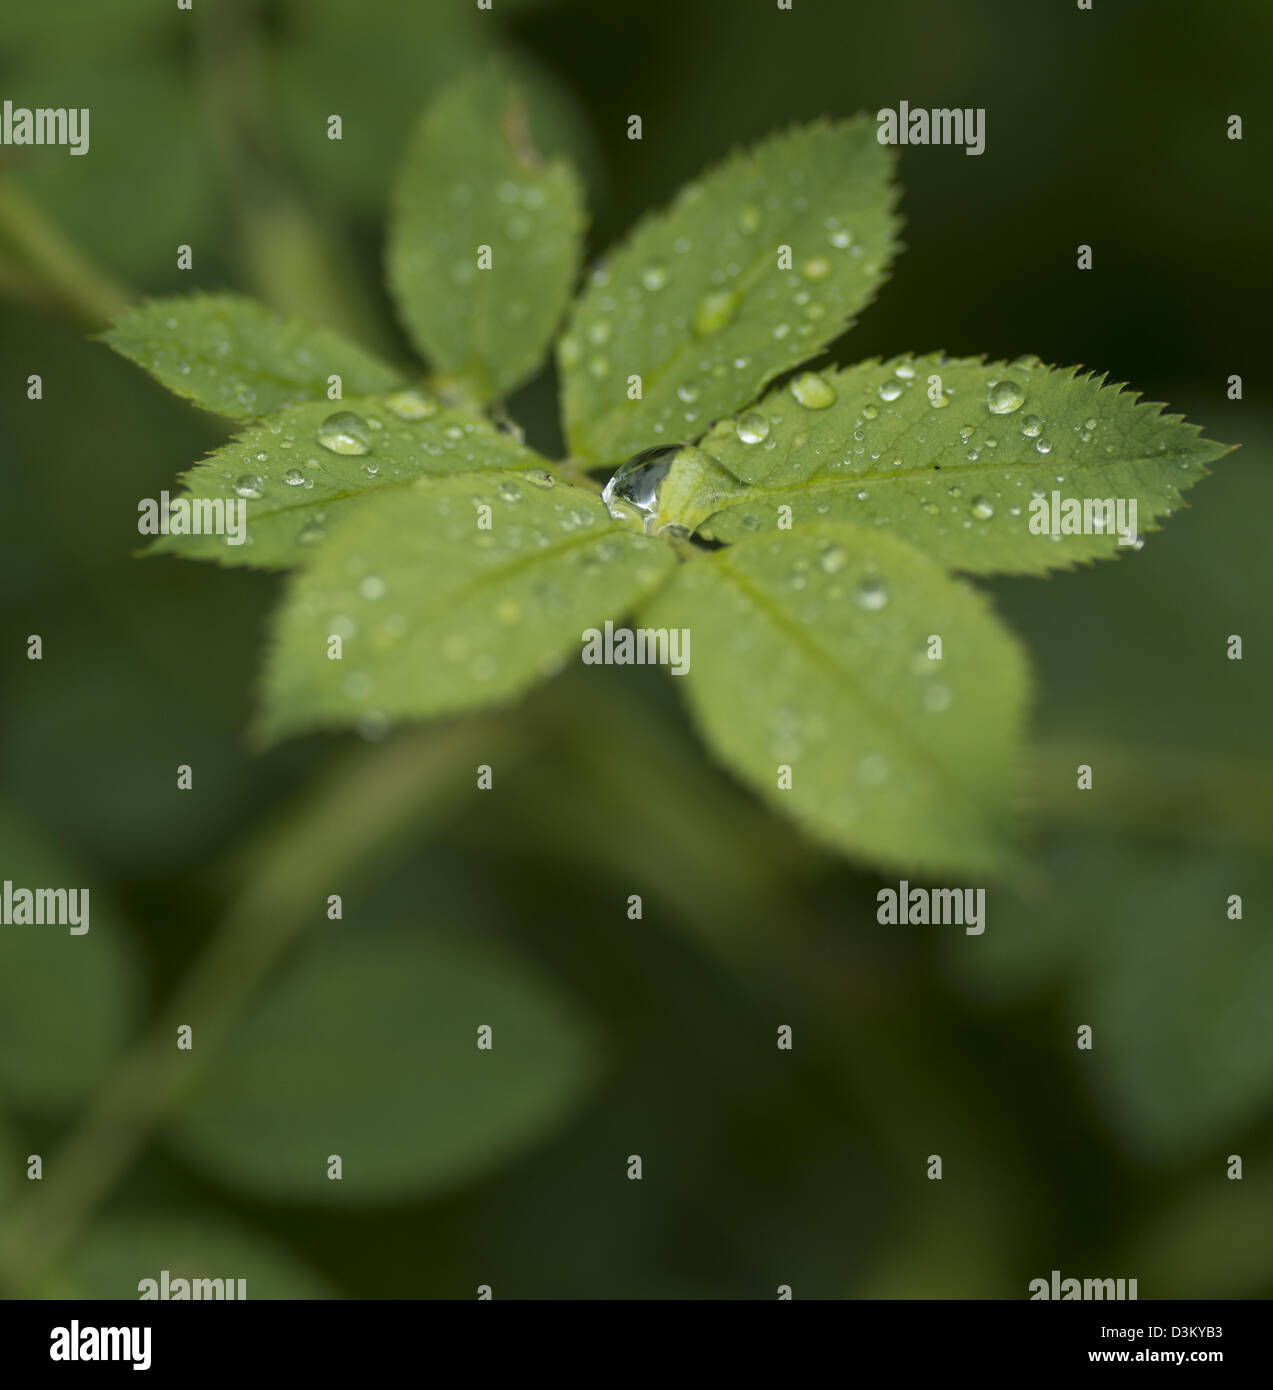 Drops on the leaves of a plant Stock Photo